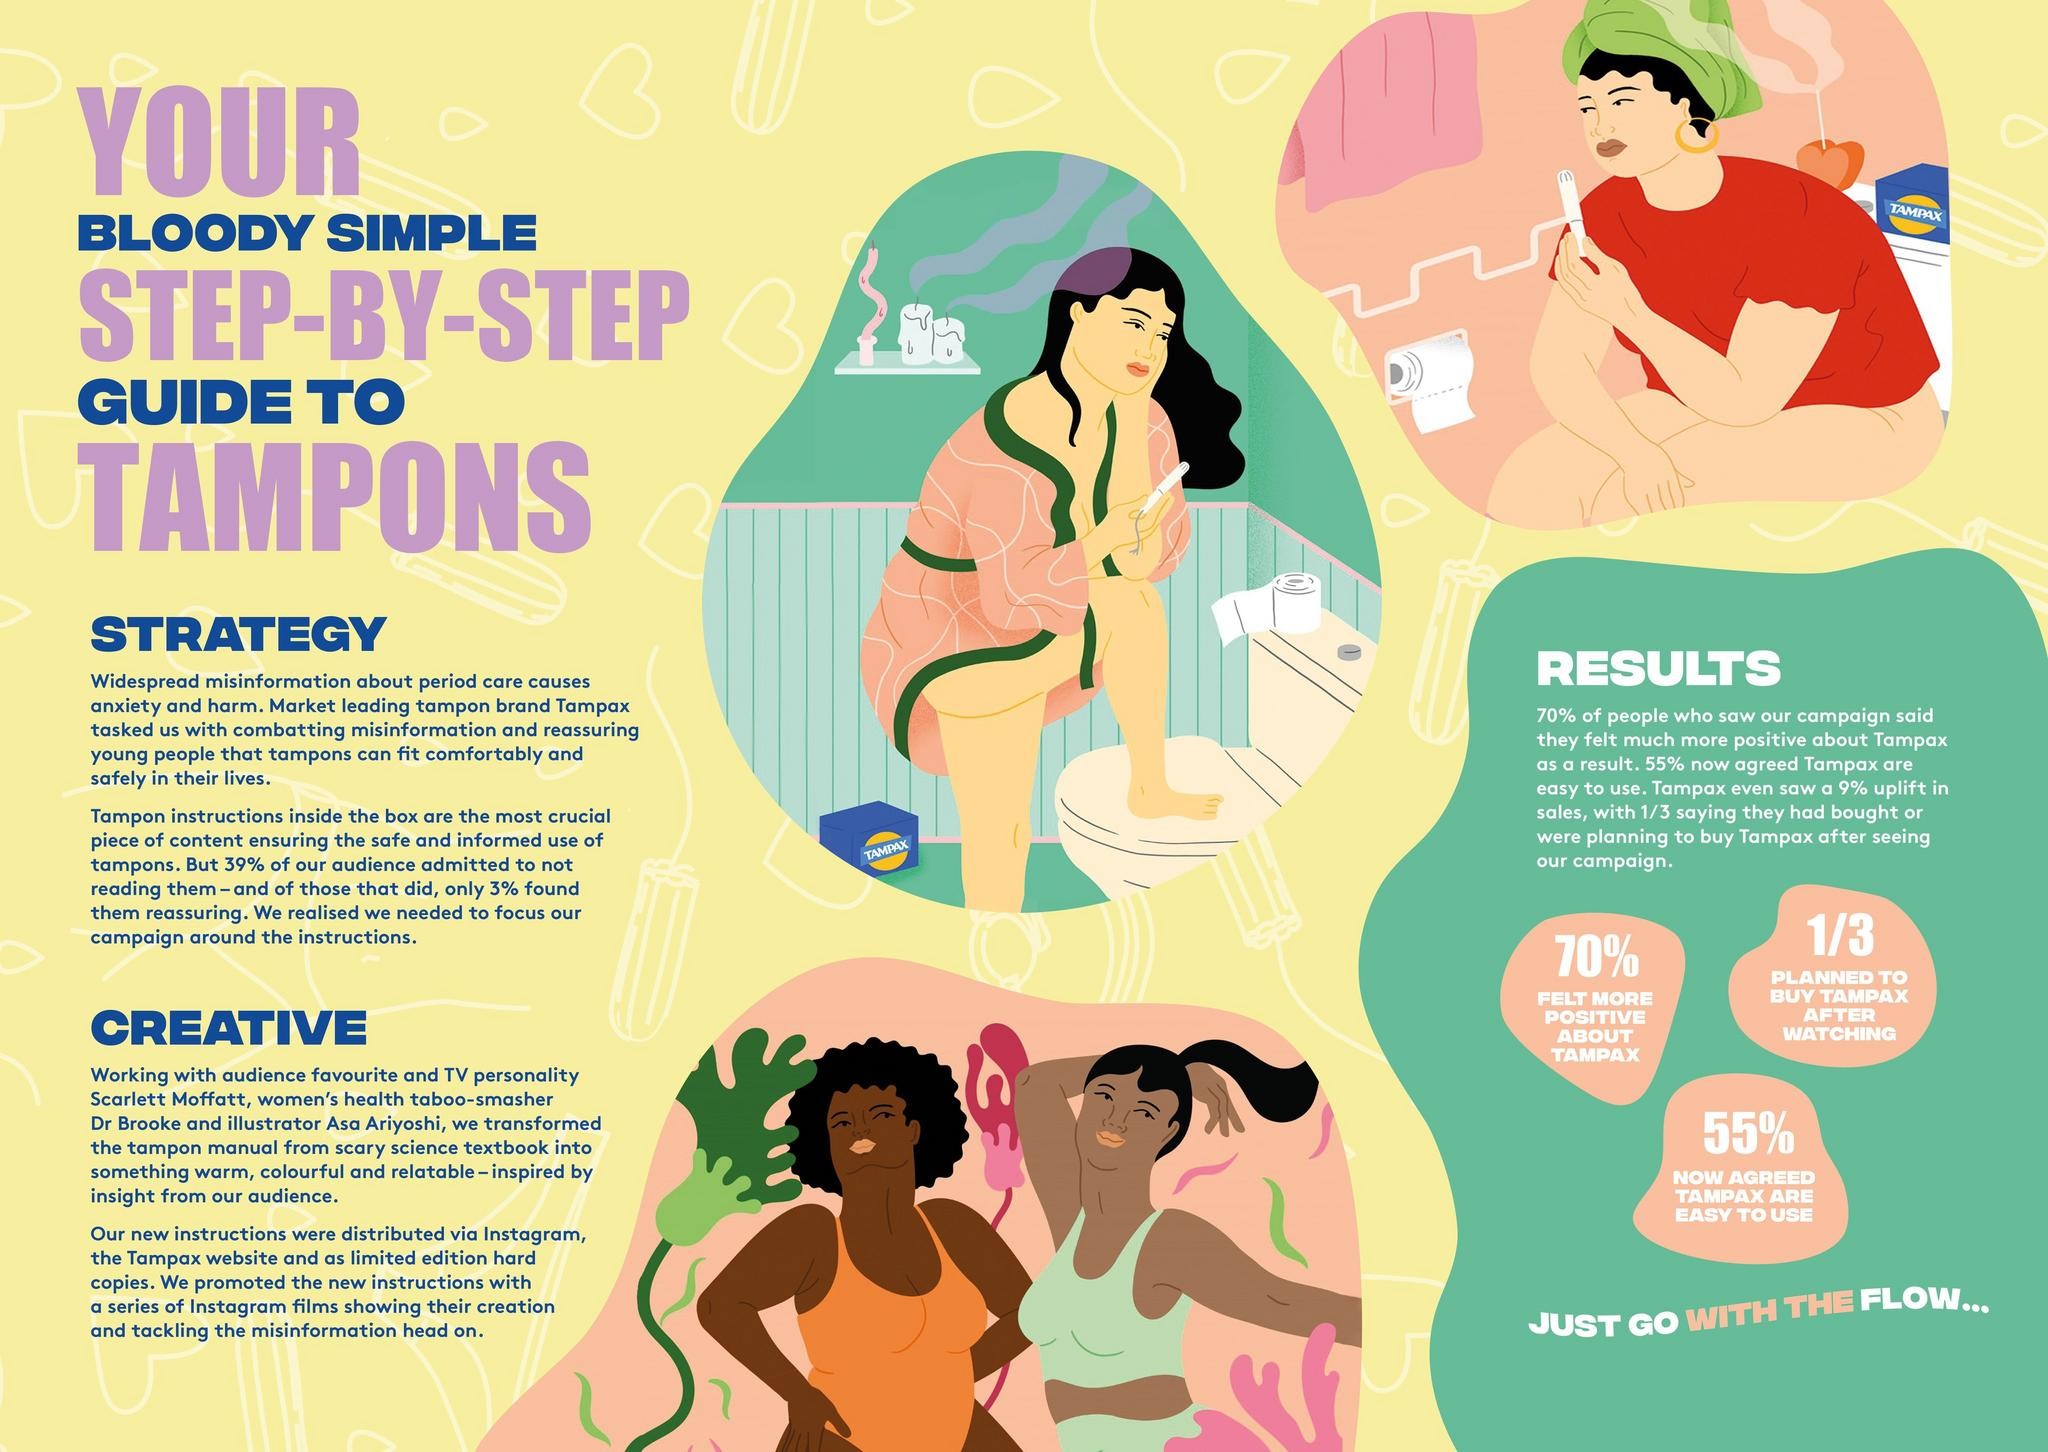 A Bloody Simple Guide To Tampons’ re-writing the rulebook for Tampax